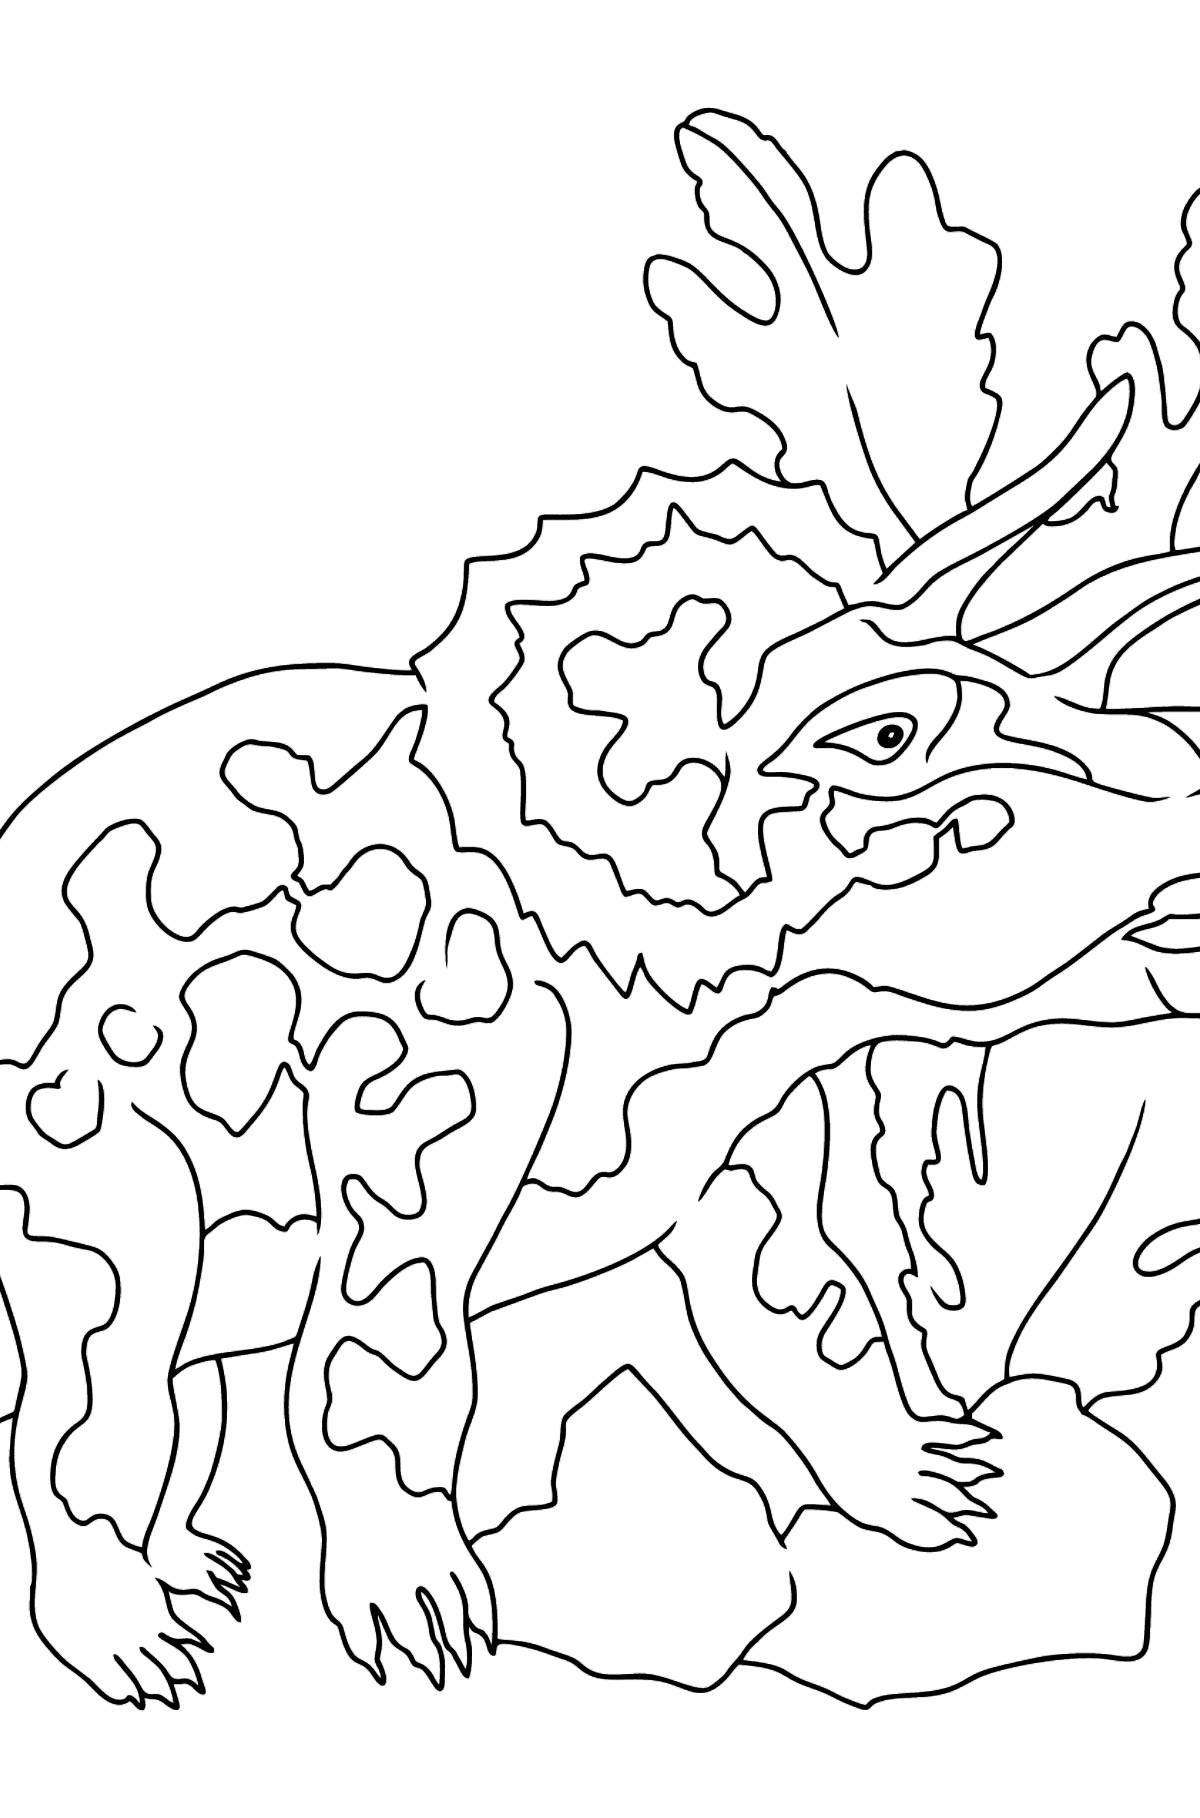 Triceratops Coloring Page - Coloring Pages for Kids